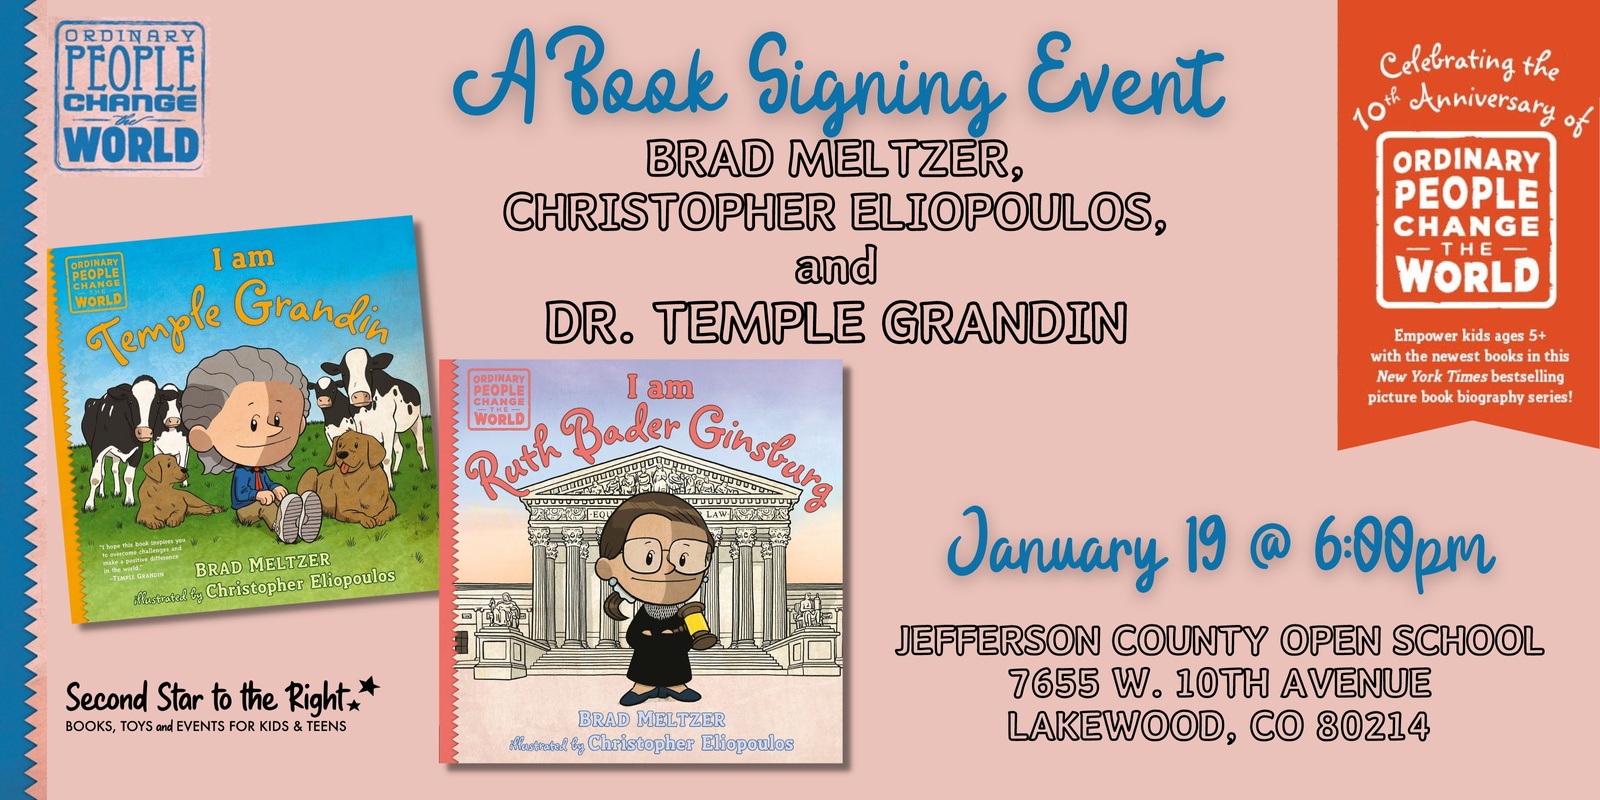 Banner image for Book Signing Event with Brad Meltzer, Christopher Eliopoulos, and Dr. Temple Grandin